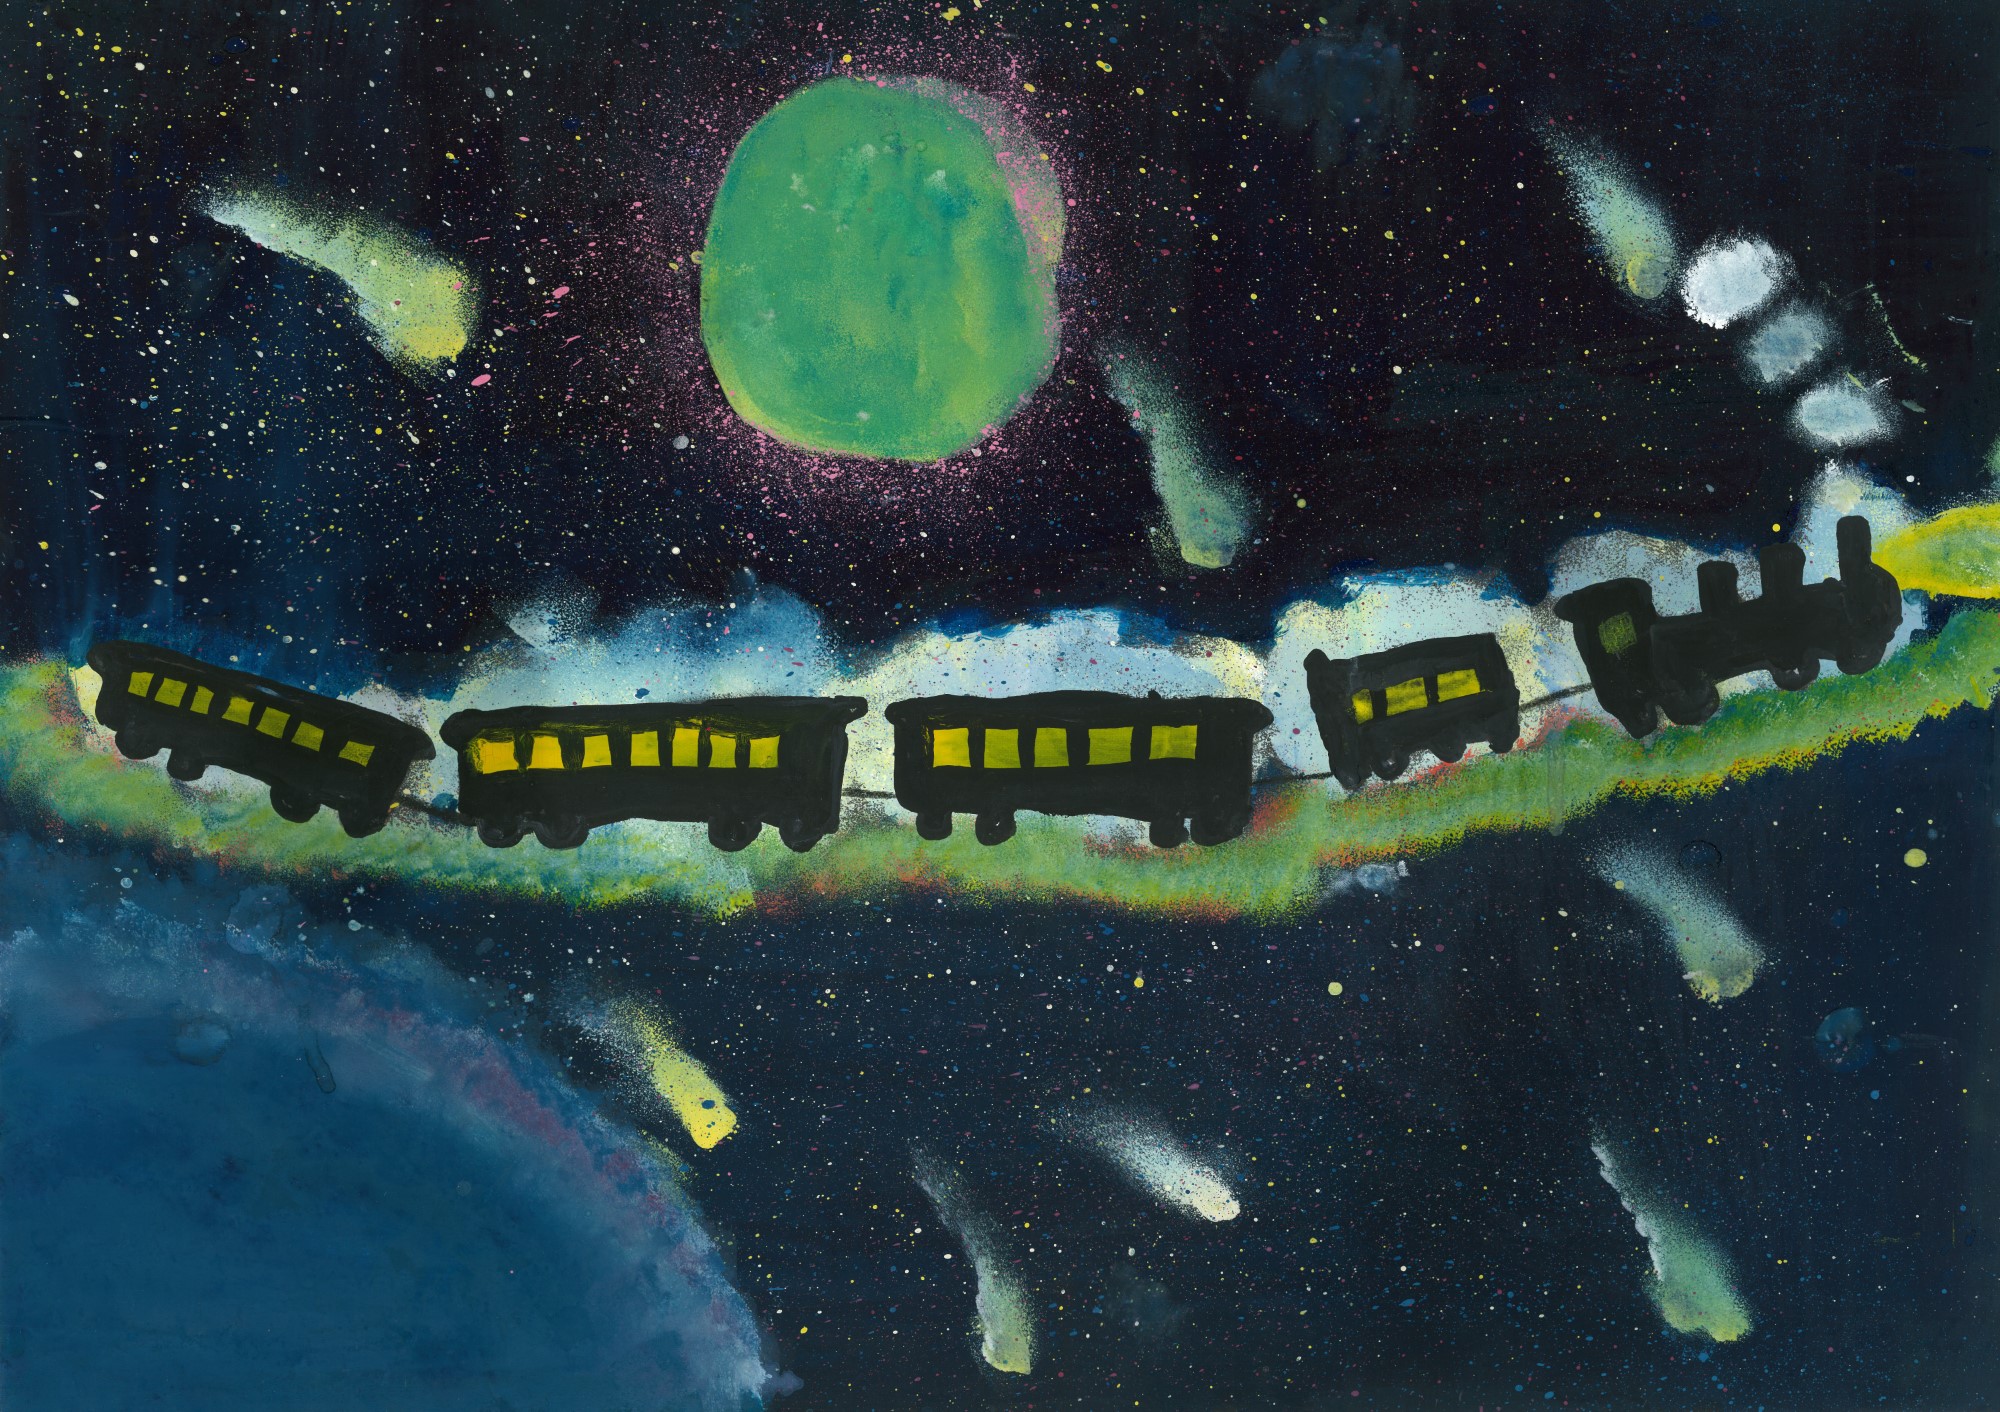 student artwork - Train in space